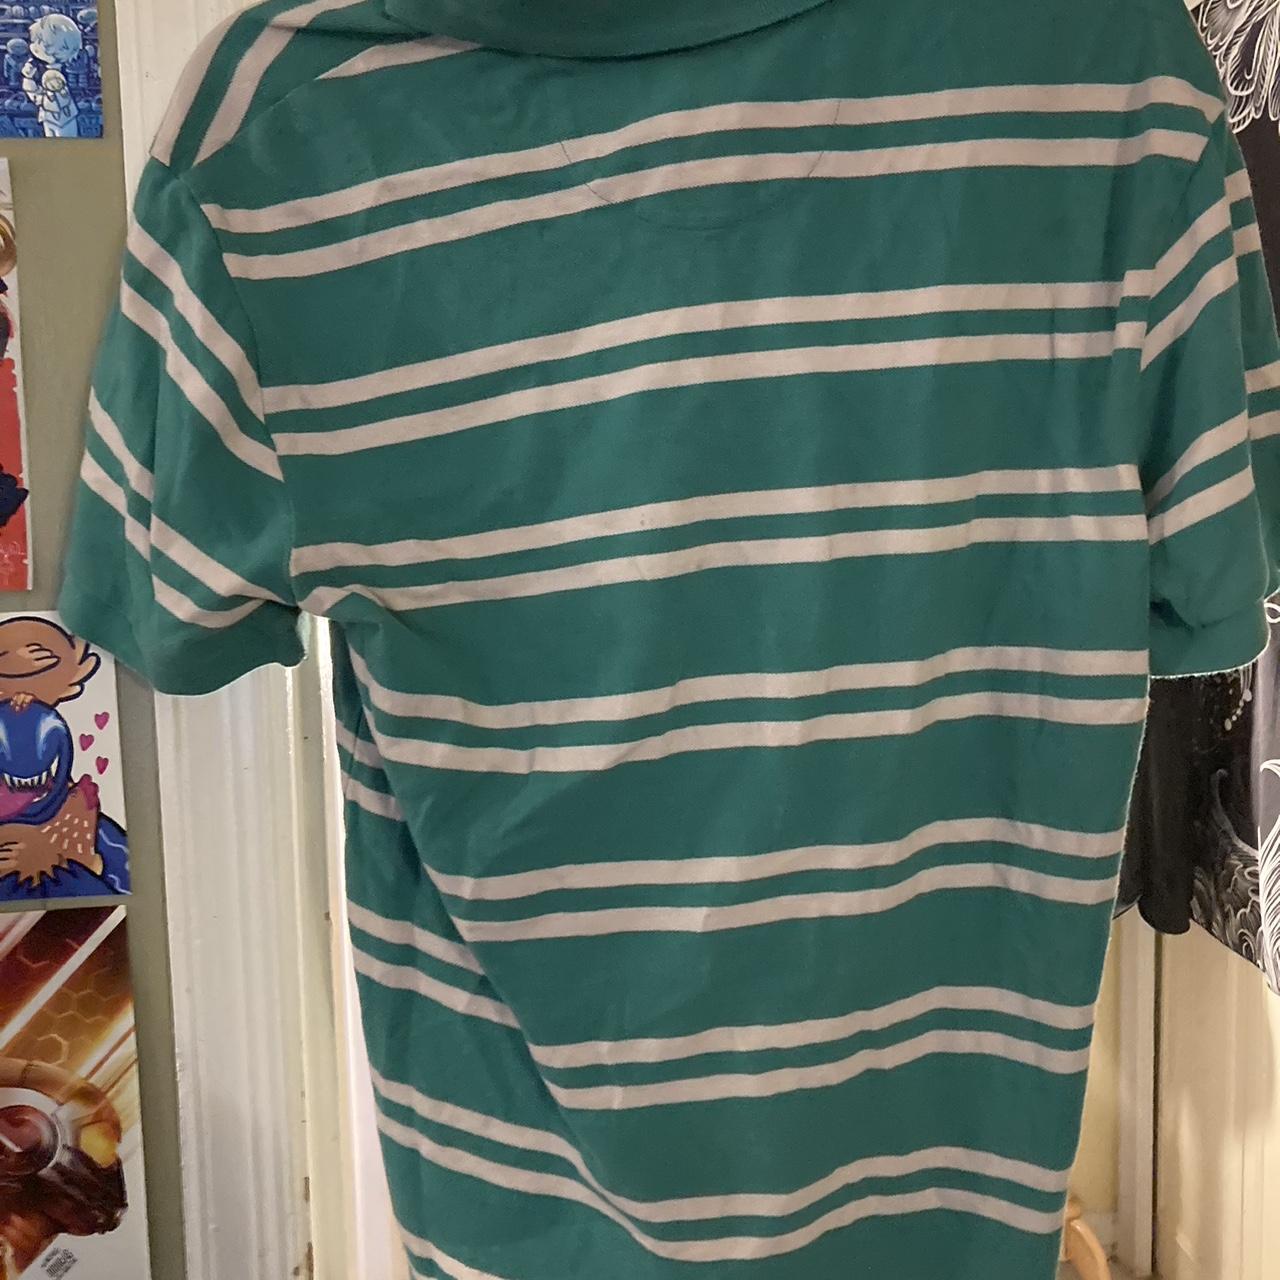 Green and white striped Chaps shirt - Depop